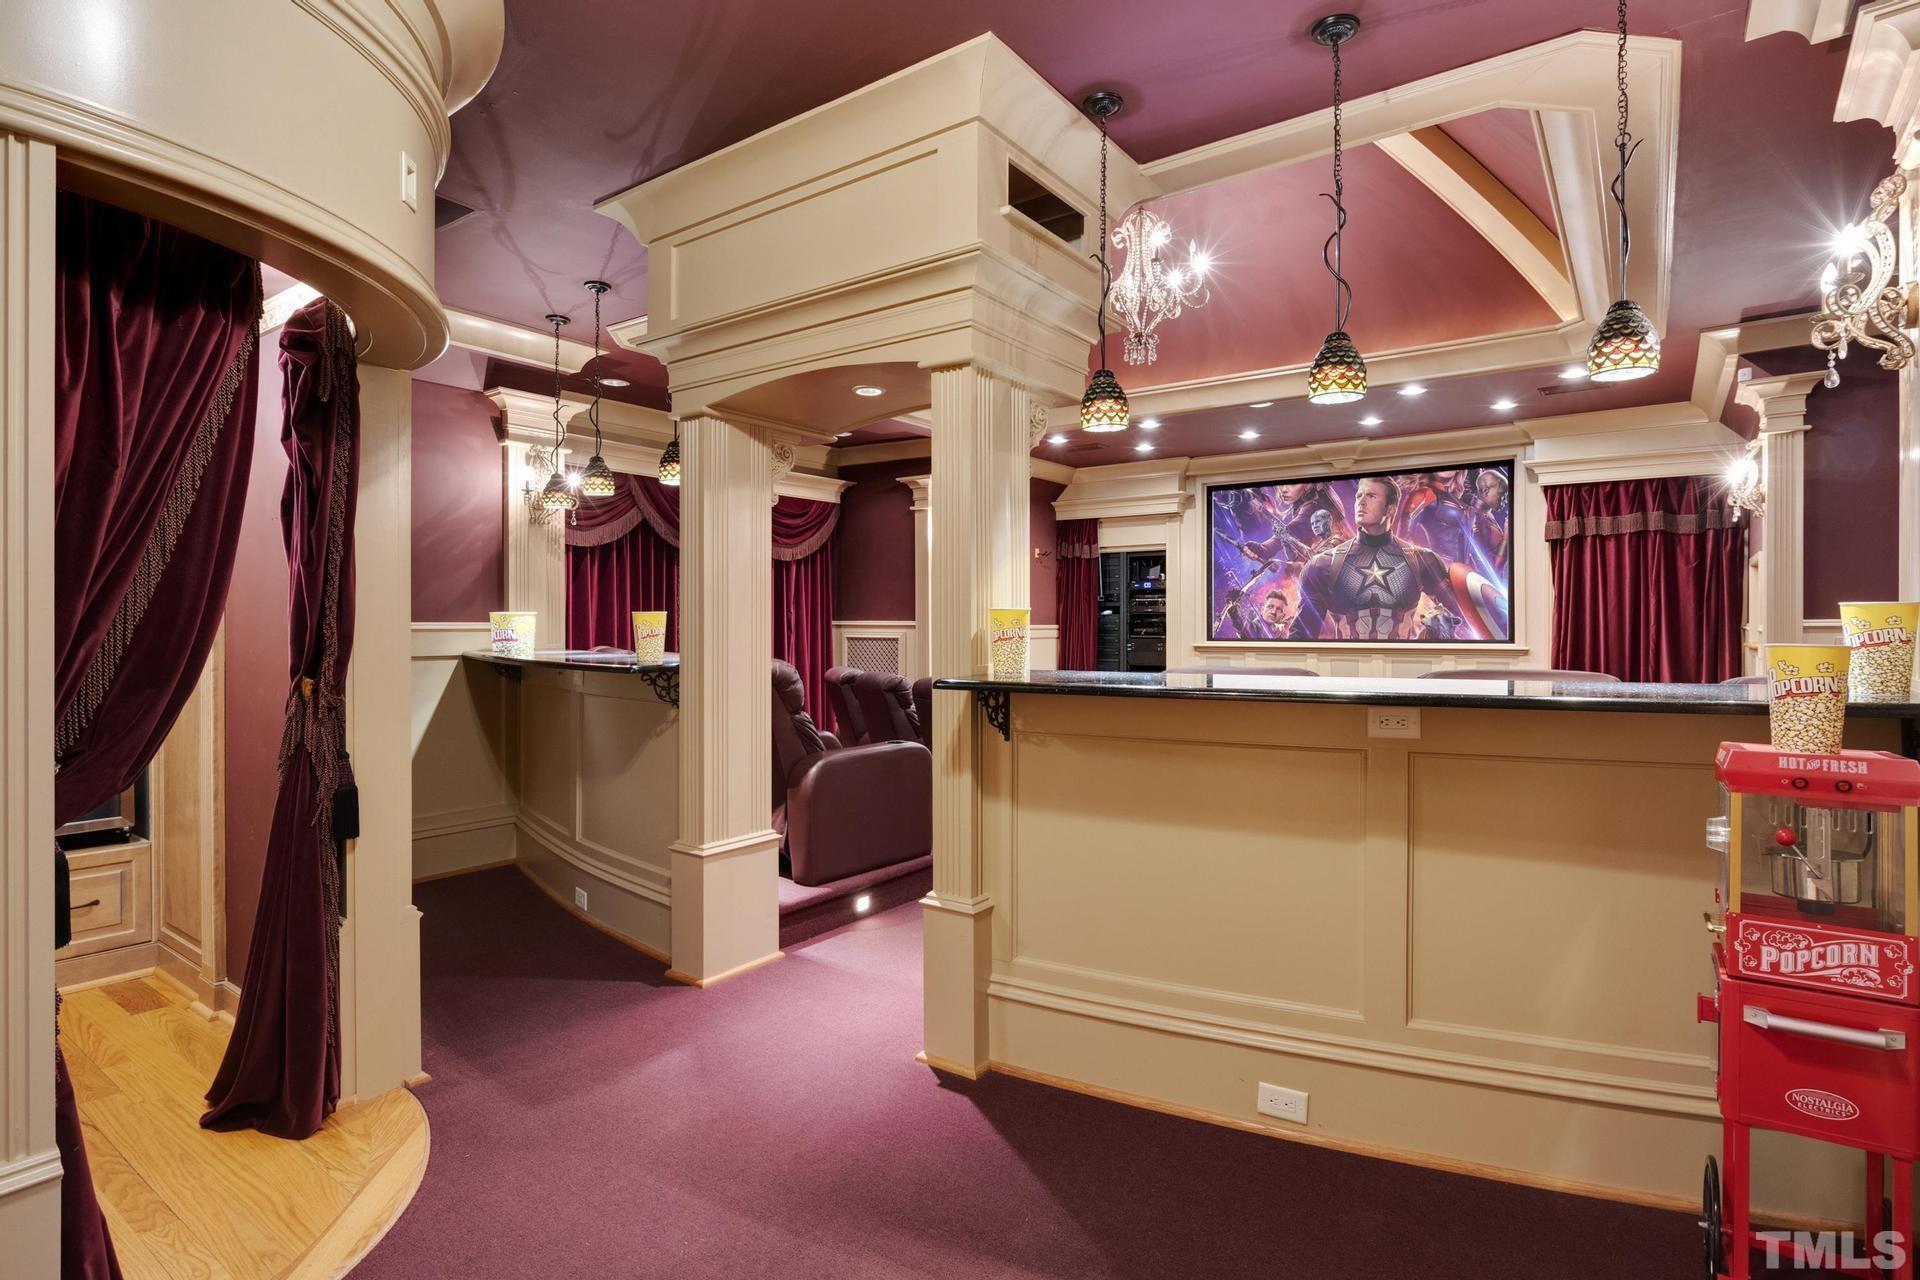 Feel like you are in an actual movie theater! 14 theater seats that recline and have drink holders. Stadium seating. Stadium lighting. Velvet Curtains. There is a stage as well for musical events, not just movies can be enjoyed here!